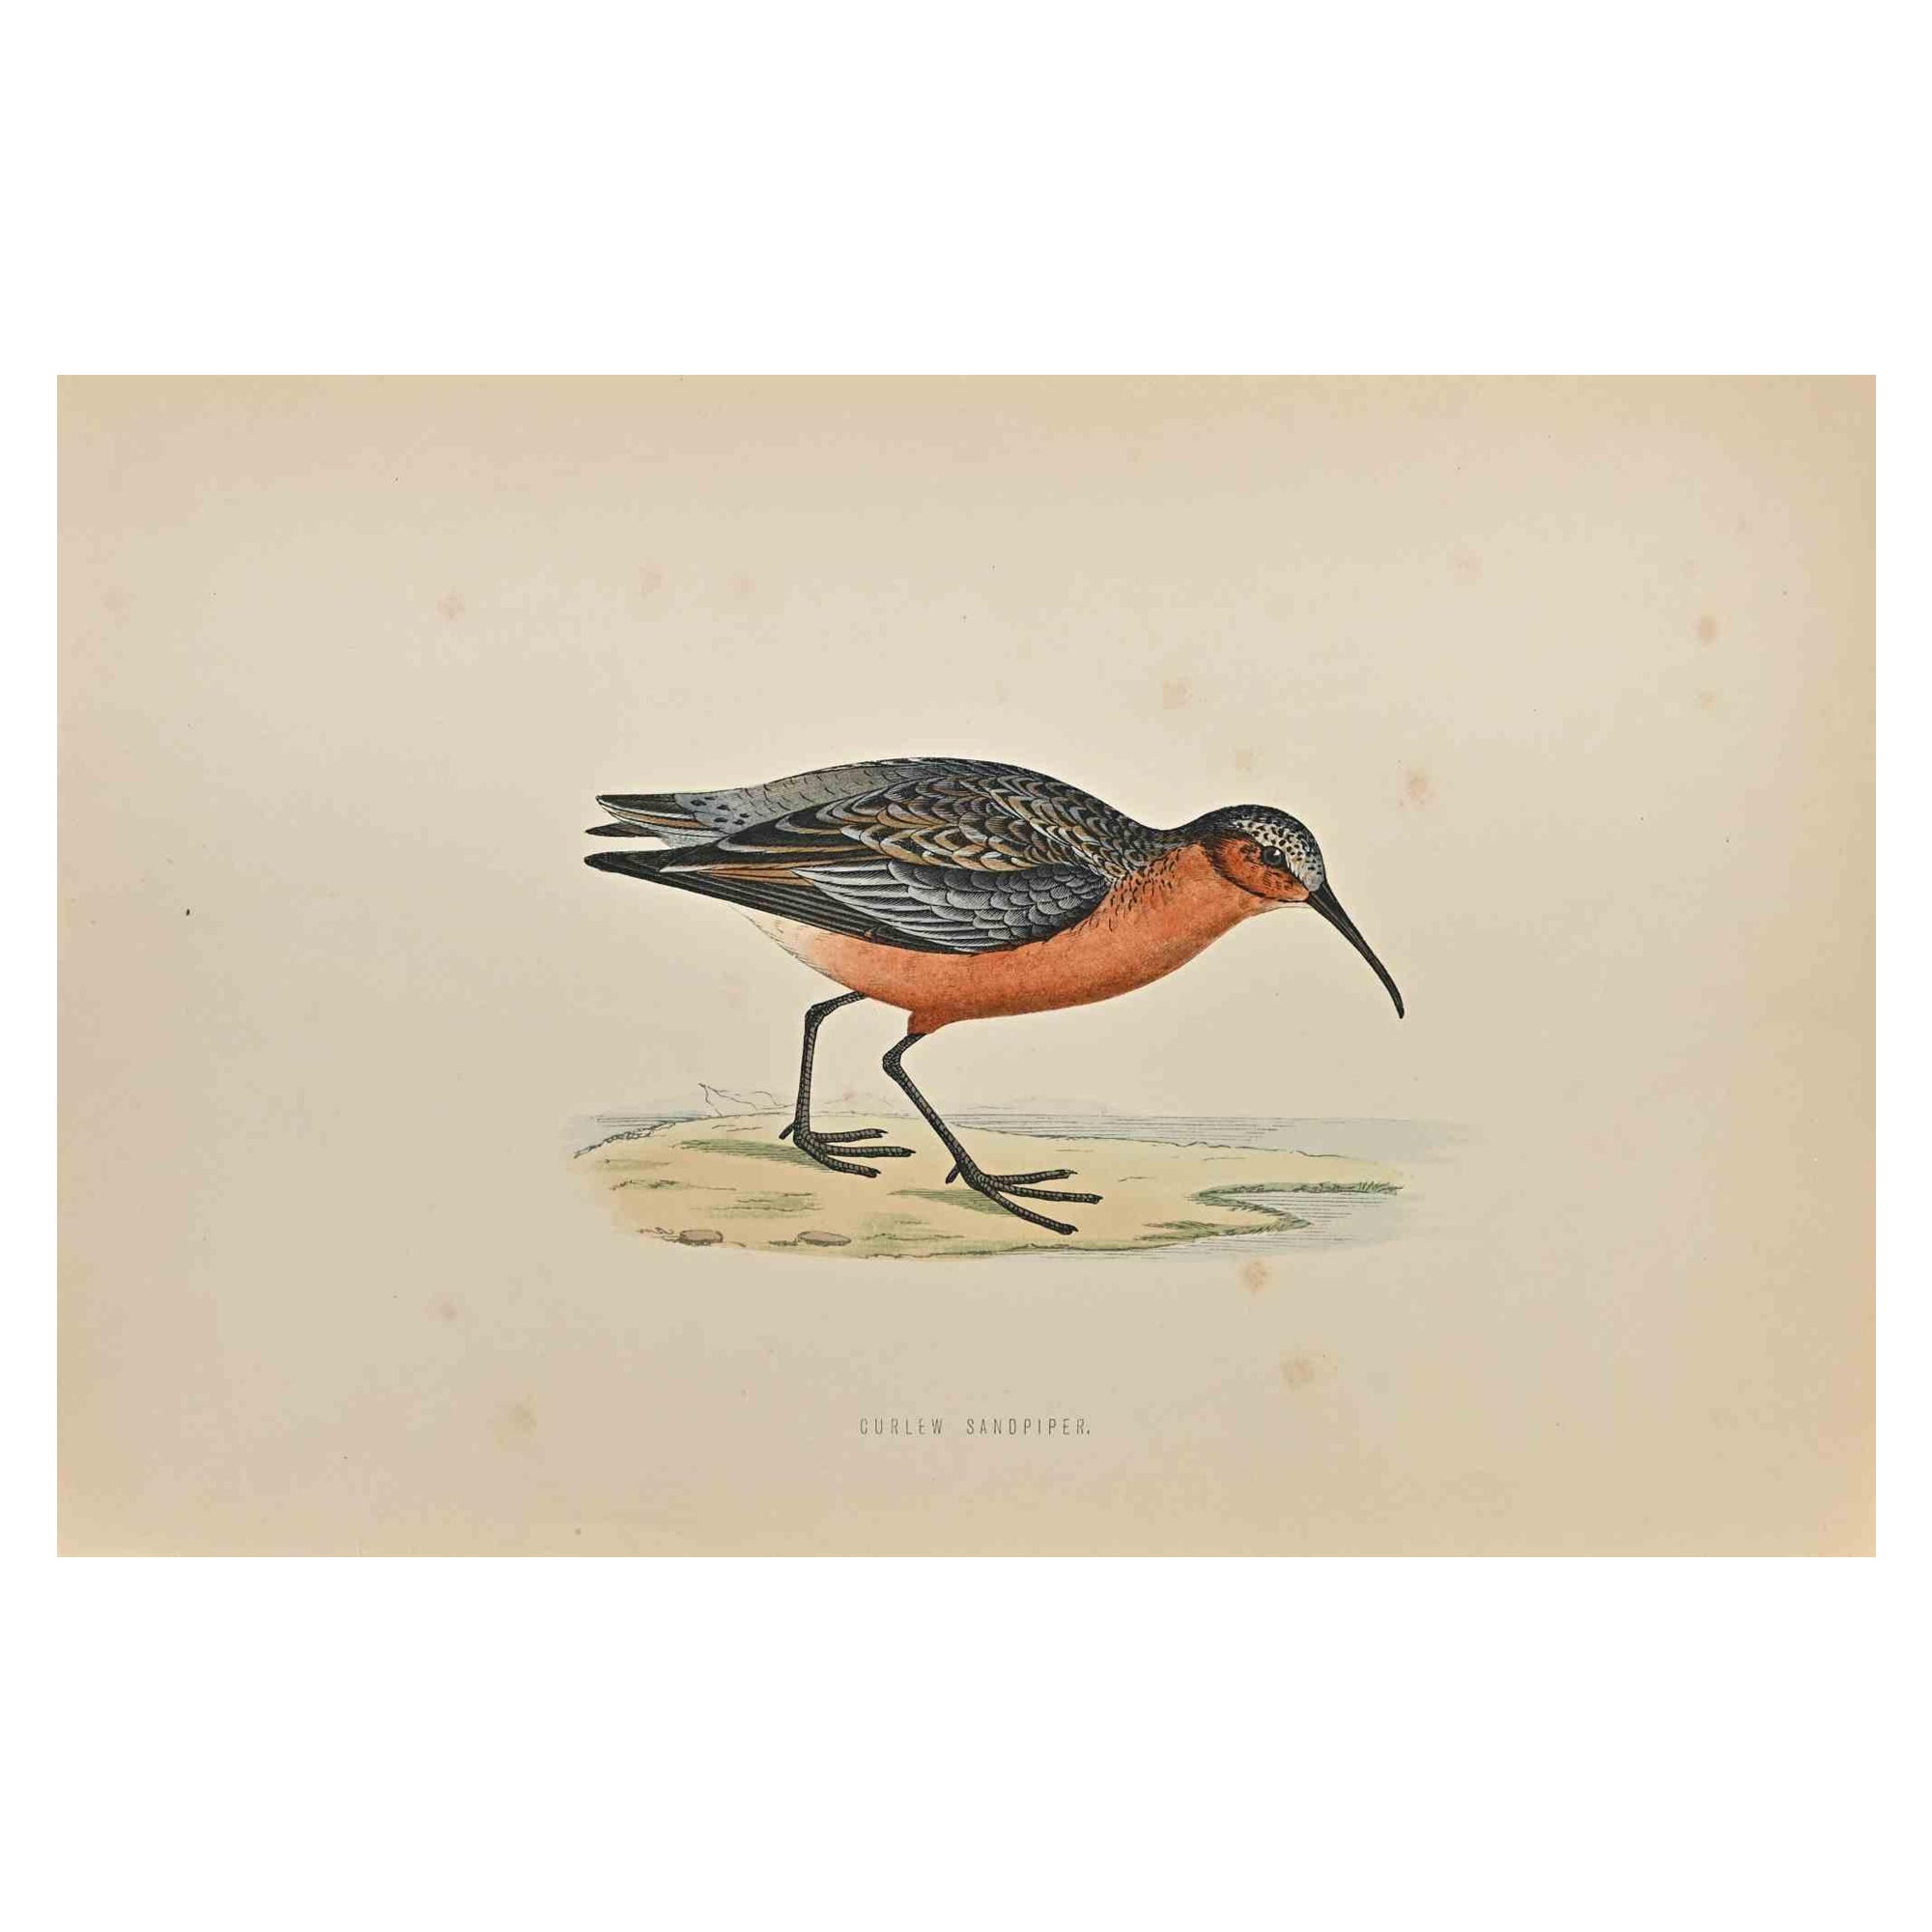 Curlew Sandpiper is a modern artwork realized in 1870 by the British artist Alexander Francis Lydon (1836-1917) . 

Woodcut print, hand colored, published by London, Bell & Sons, 1870.  Name of the bird printed in plate. This work is part of a print